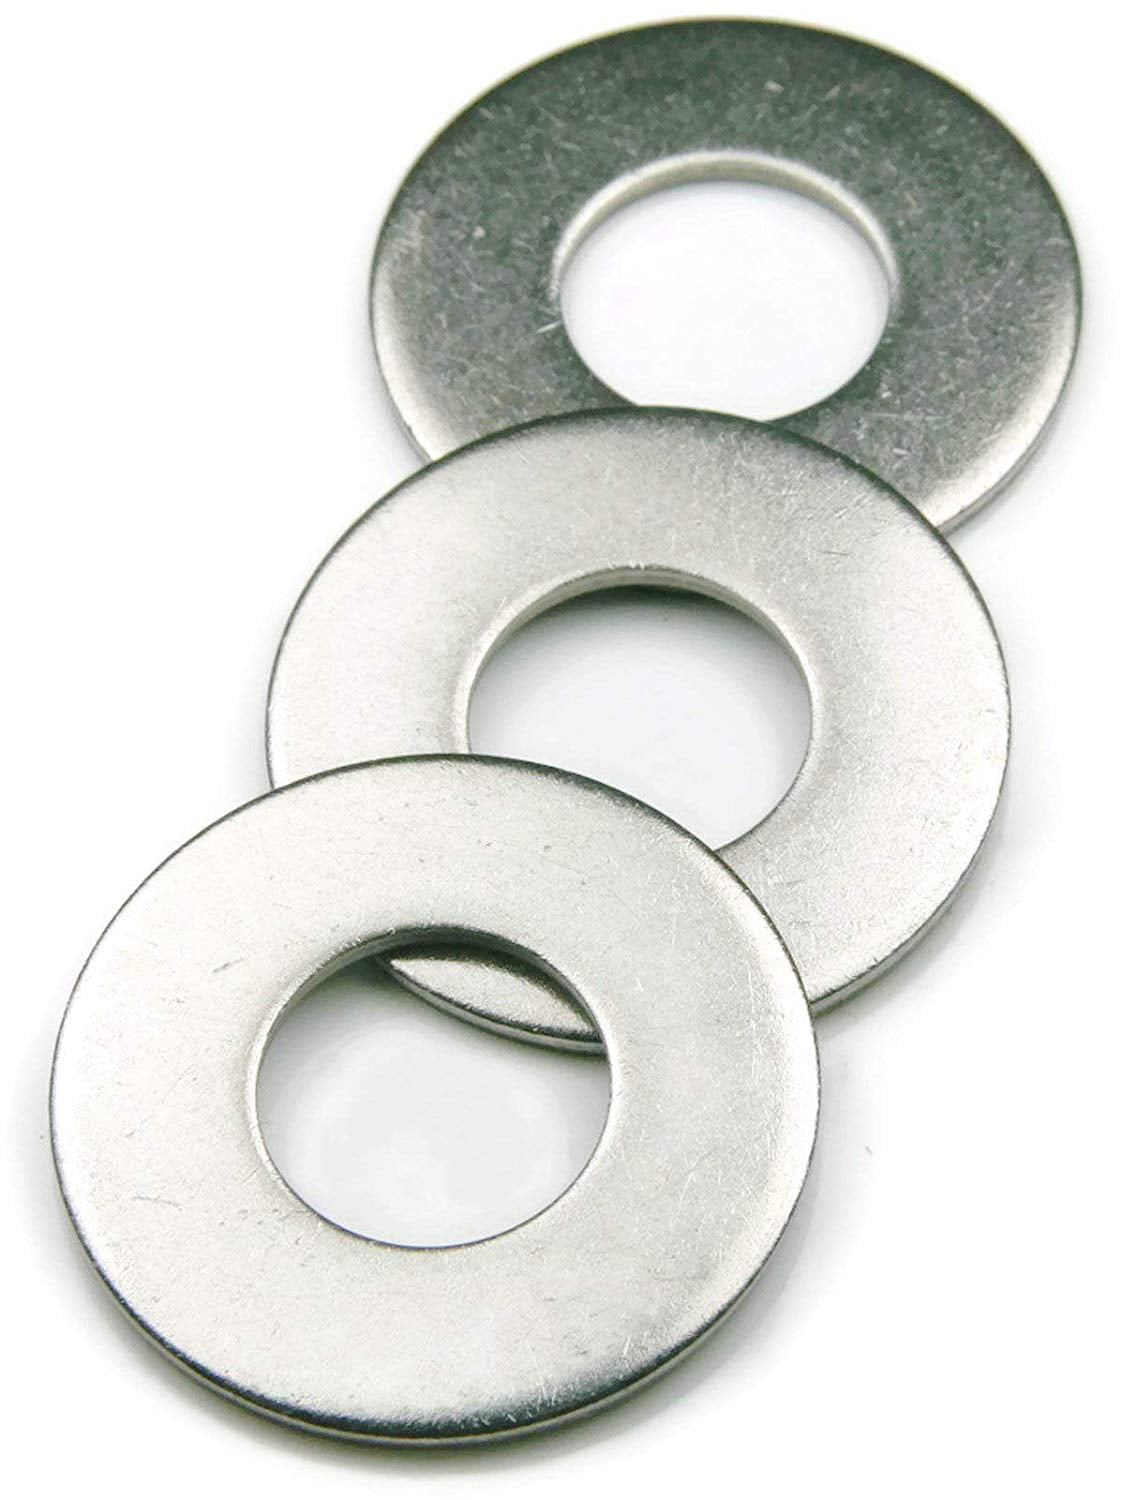 1/4 x 1" Fender Washers Large Diameter Stainless Steel 18-8 Qty 500 